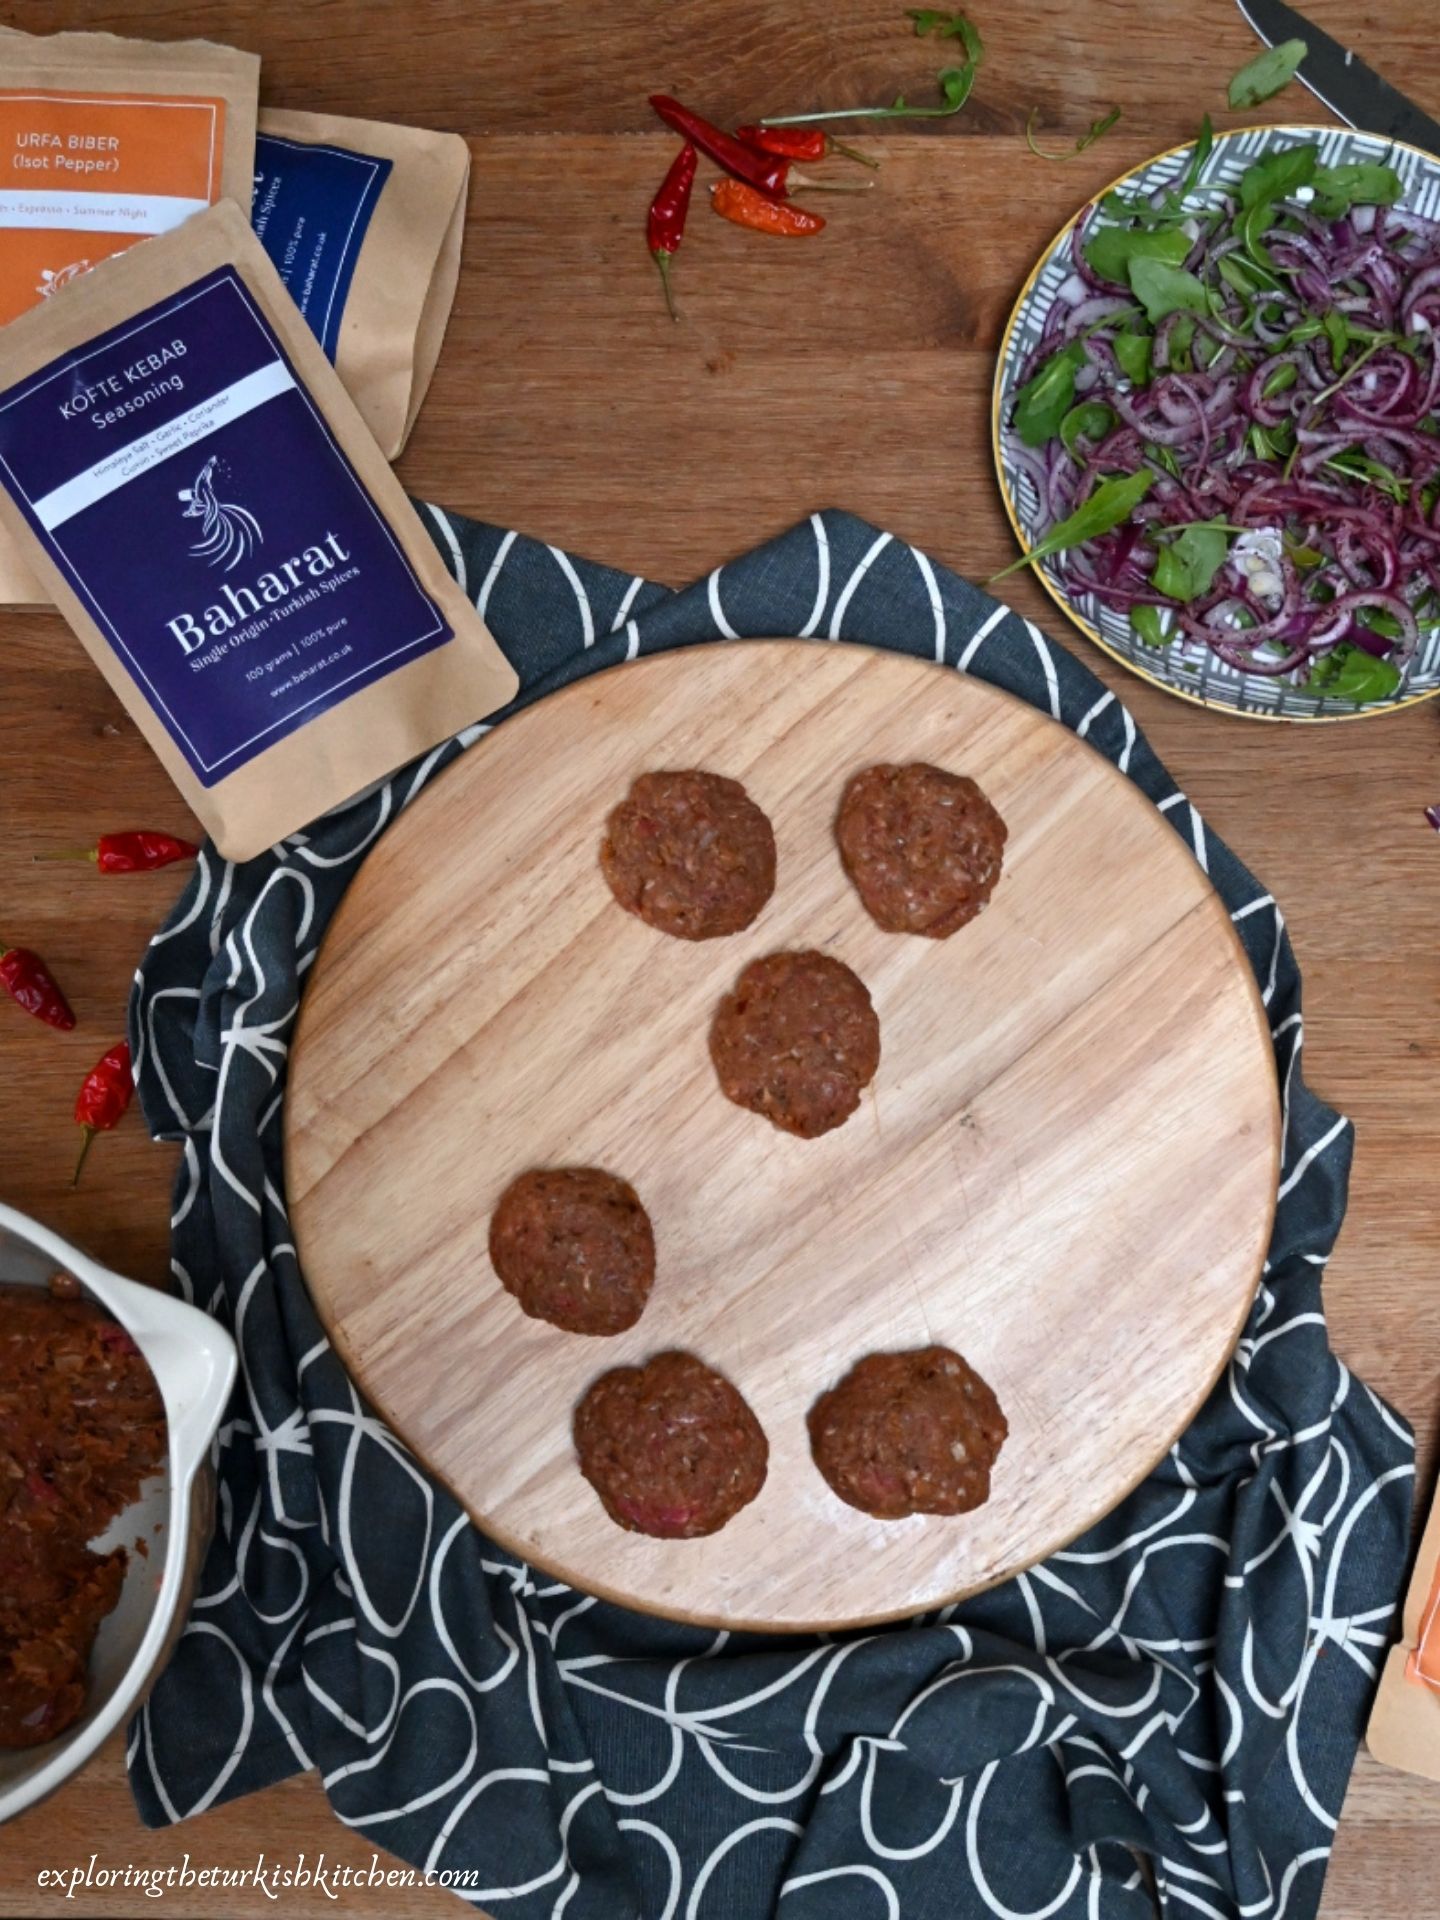 Table with half made Turkish meatballs, sumac and red onions and packets of Turkish spices from Uk supplier Baharat.co.uk